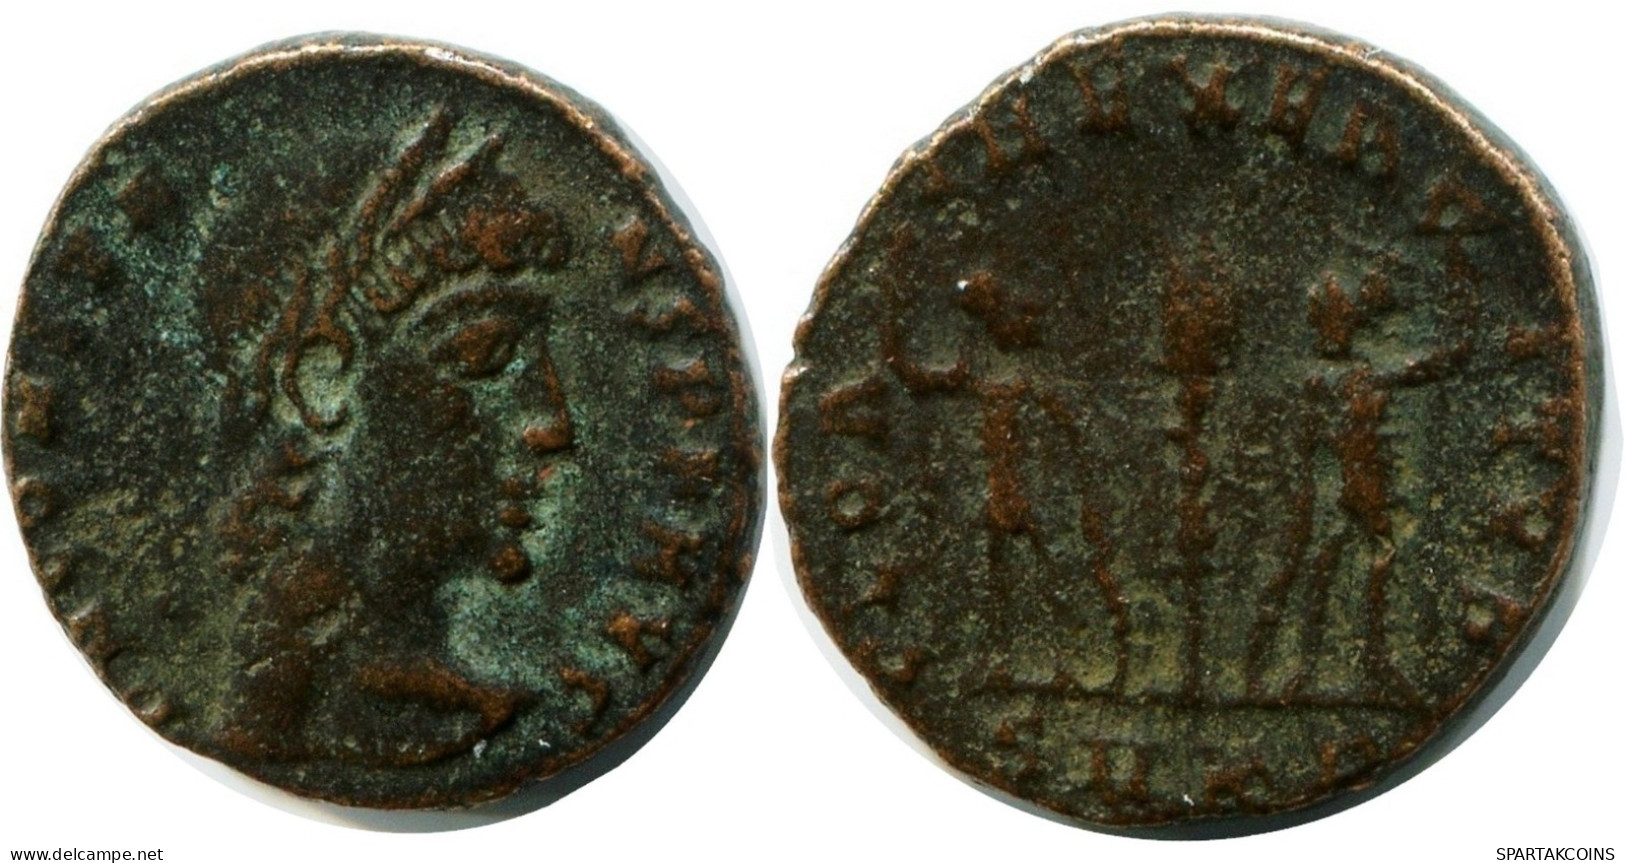 CONSTANS MINTED IN CYZICUS FROM THE ROYAL ONTARIO MUSEUM #ANC11650.14.D.A - El Imperio Christiano (307 / 363)